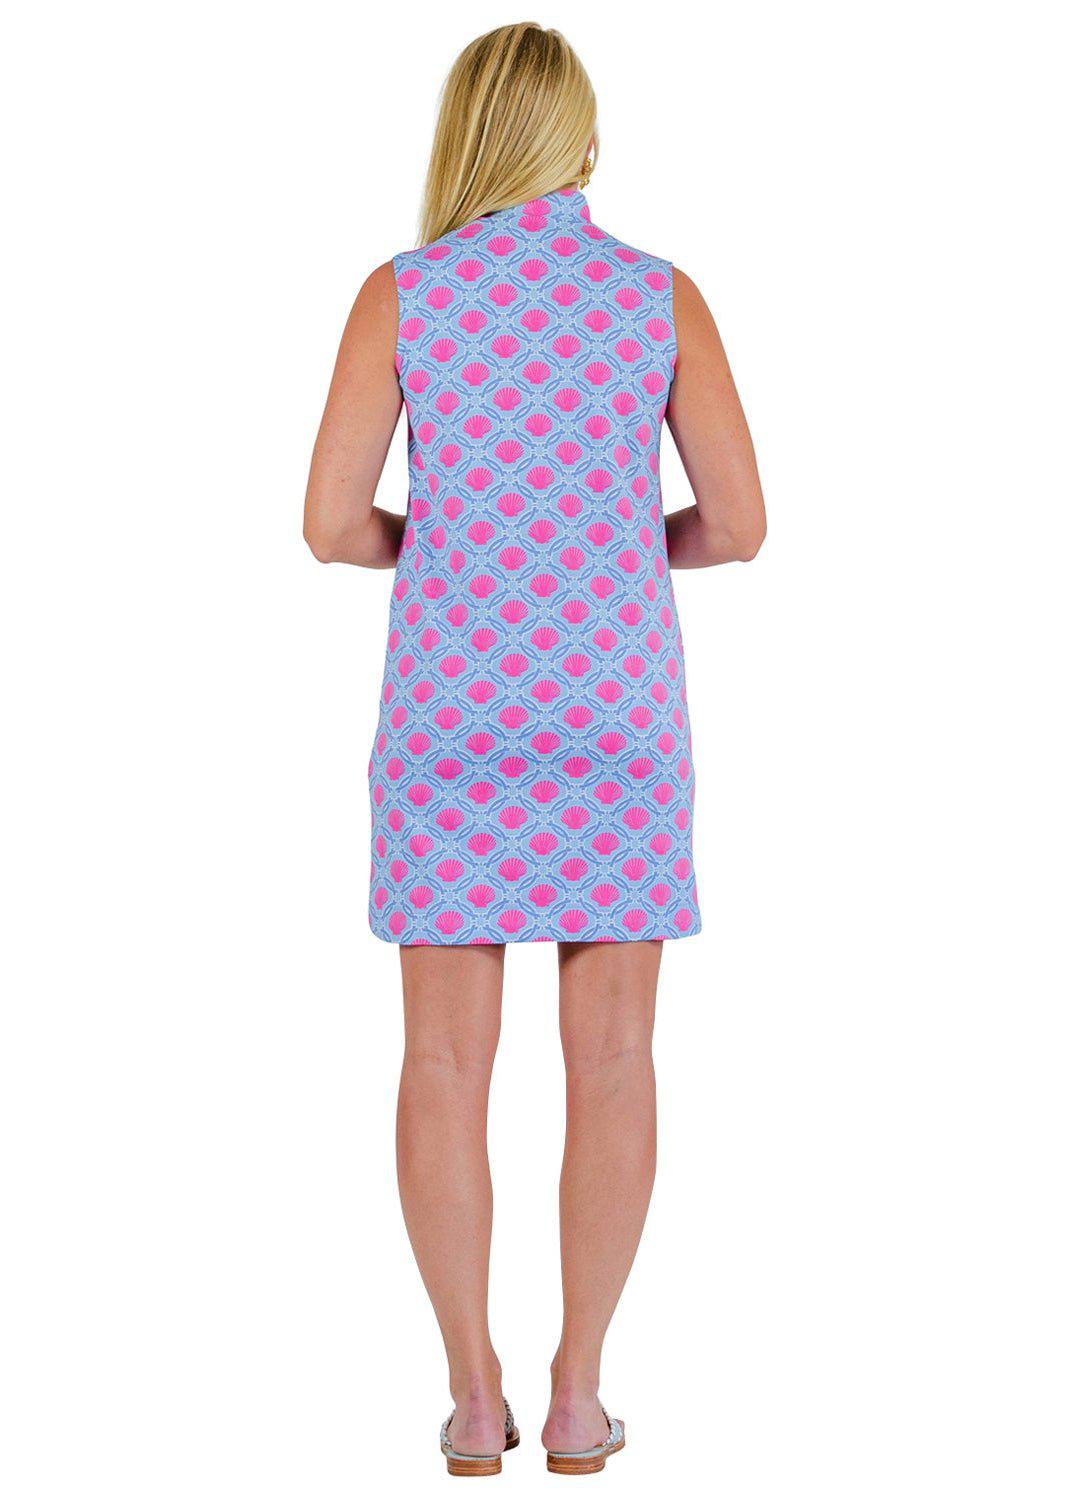 Seaport Sleeveless Shift - Bamboo Circles in Pink/Blue